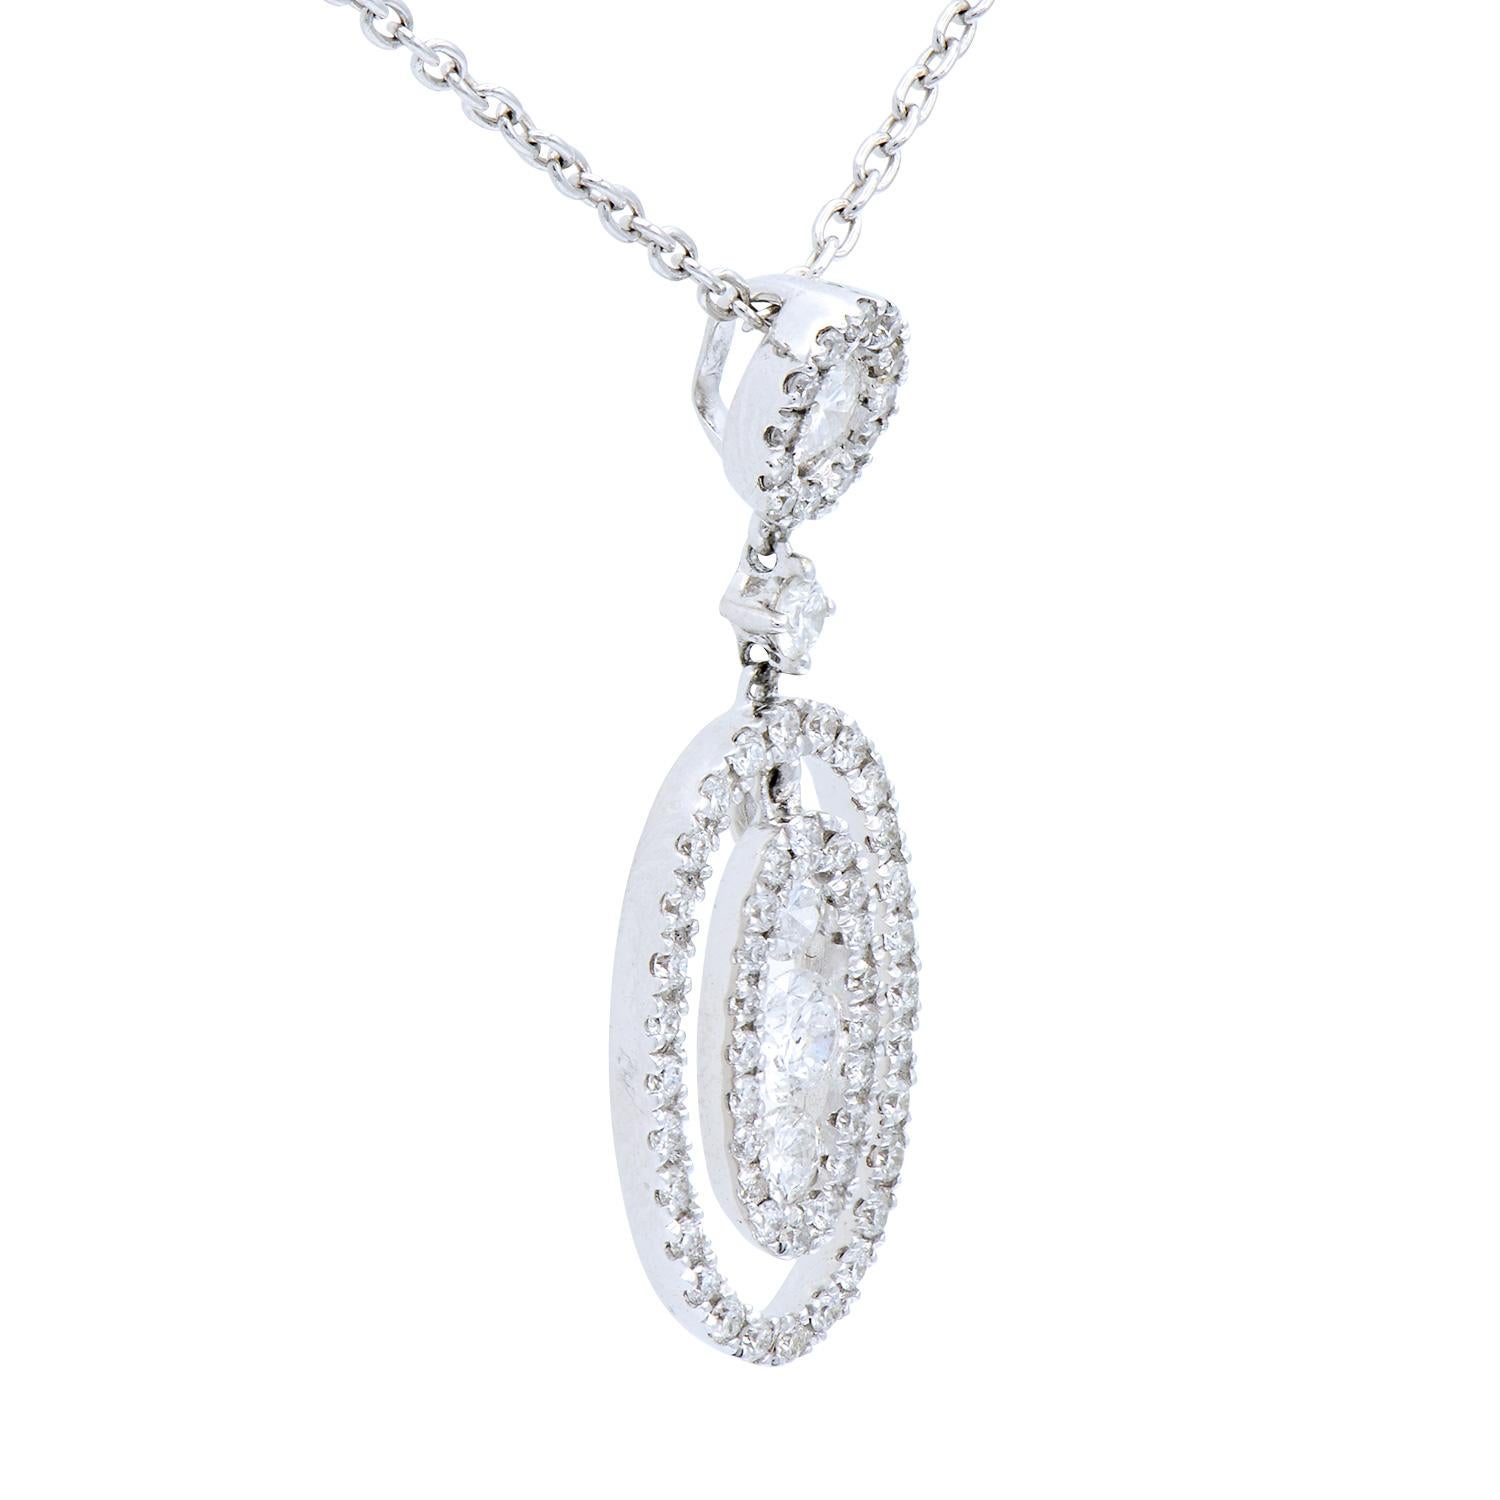 This beautiful pendant is made of 65 round VS2, G color diamonds totalling 0.62 carats to create unique oval design hanging from a round haloed diamond on top. The diamonds are set in 1.5 grams of 18 karat white gold. Included is an 18 karat white